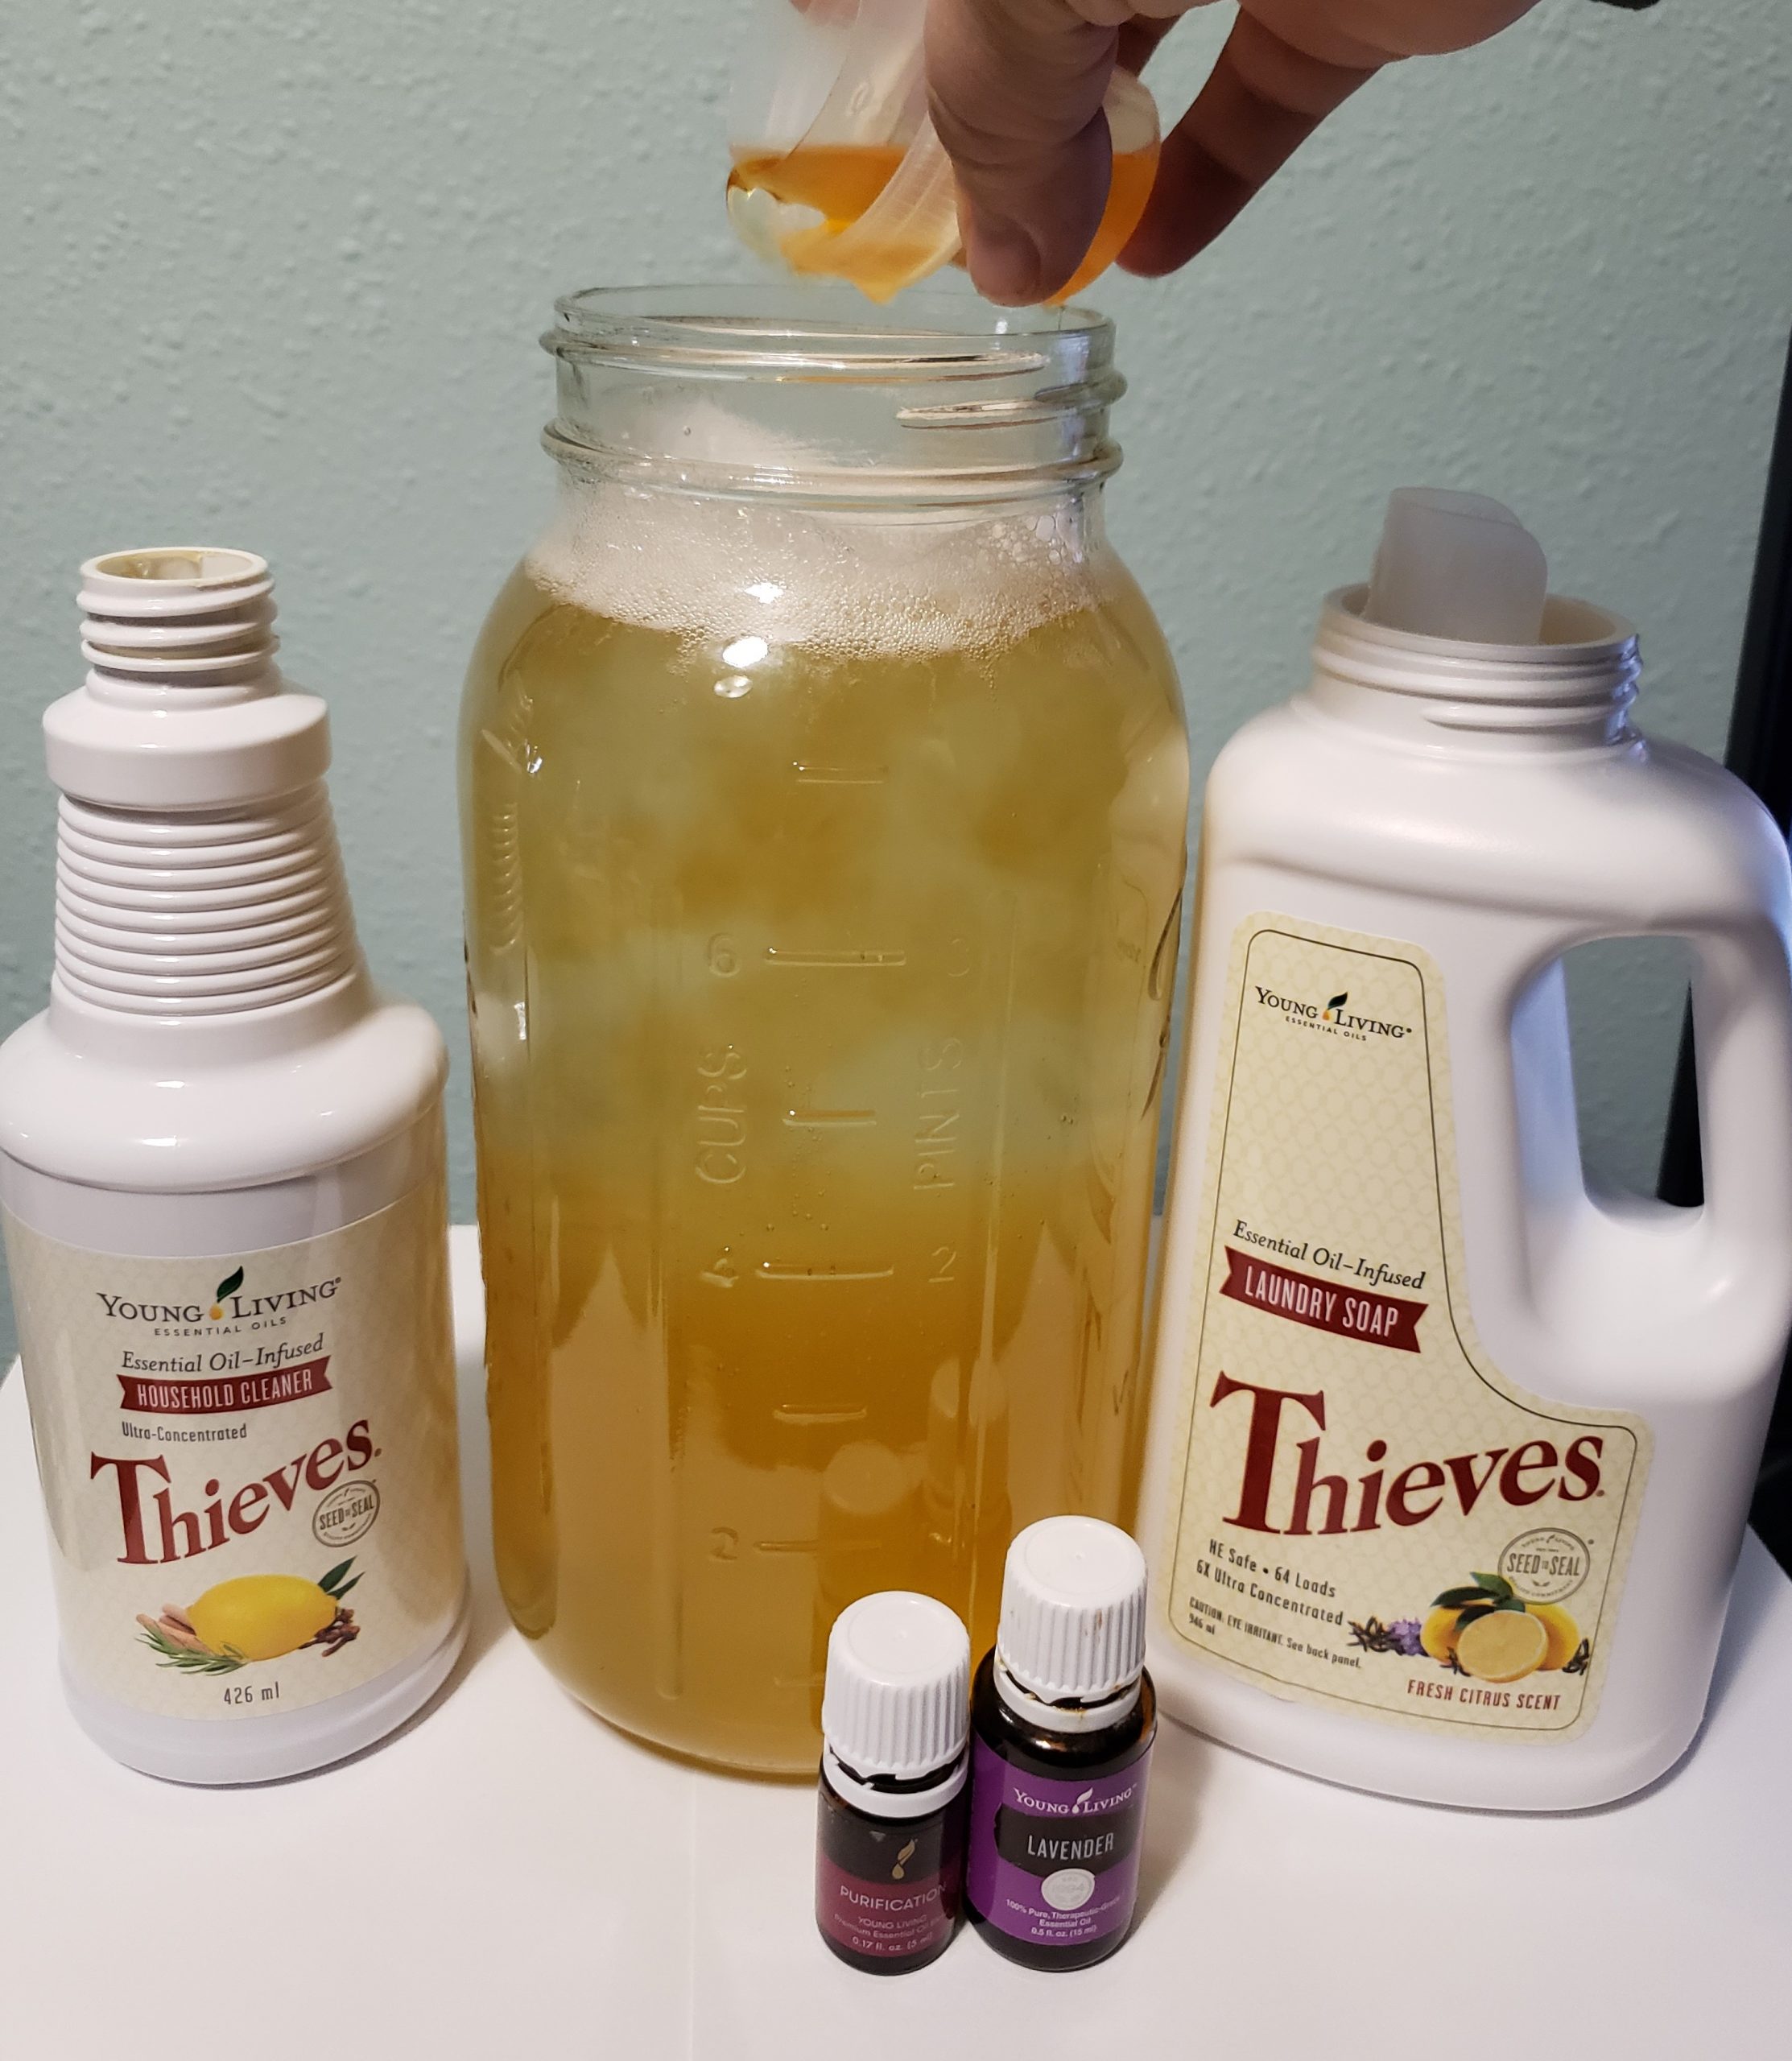 young living thieves household cleaner being poured into large glass jar next to thieves laundry soap and cleaner bottles and purification blend and lavender essential oil